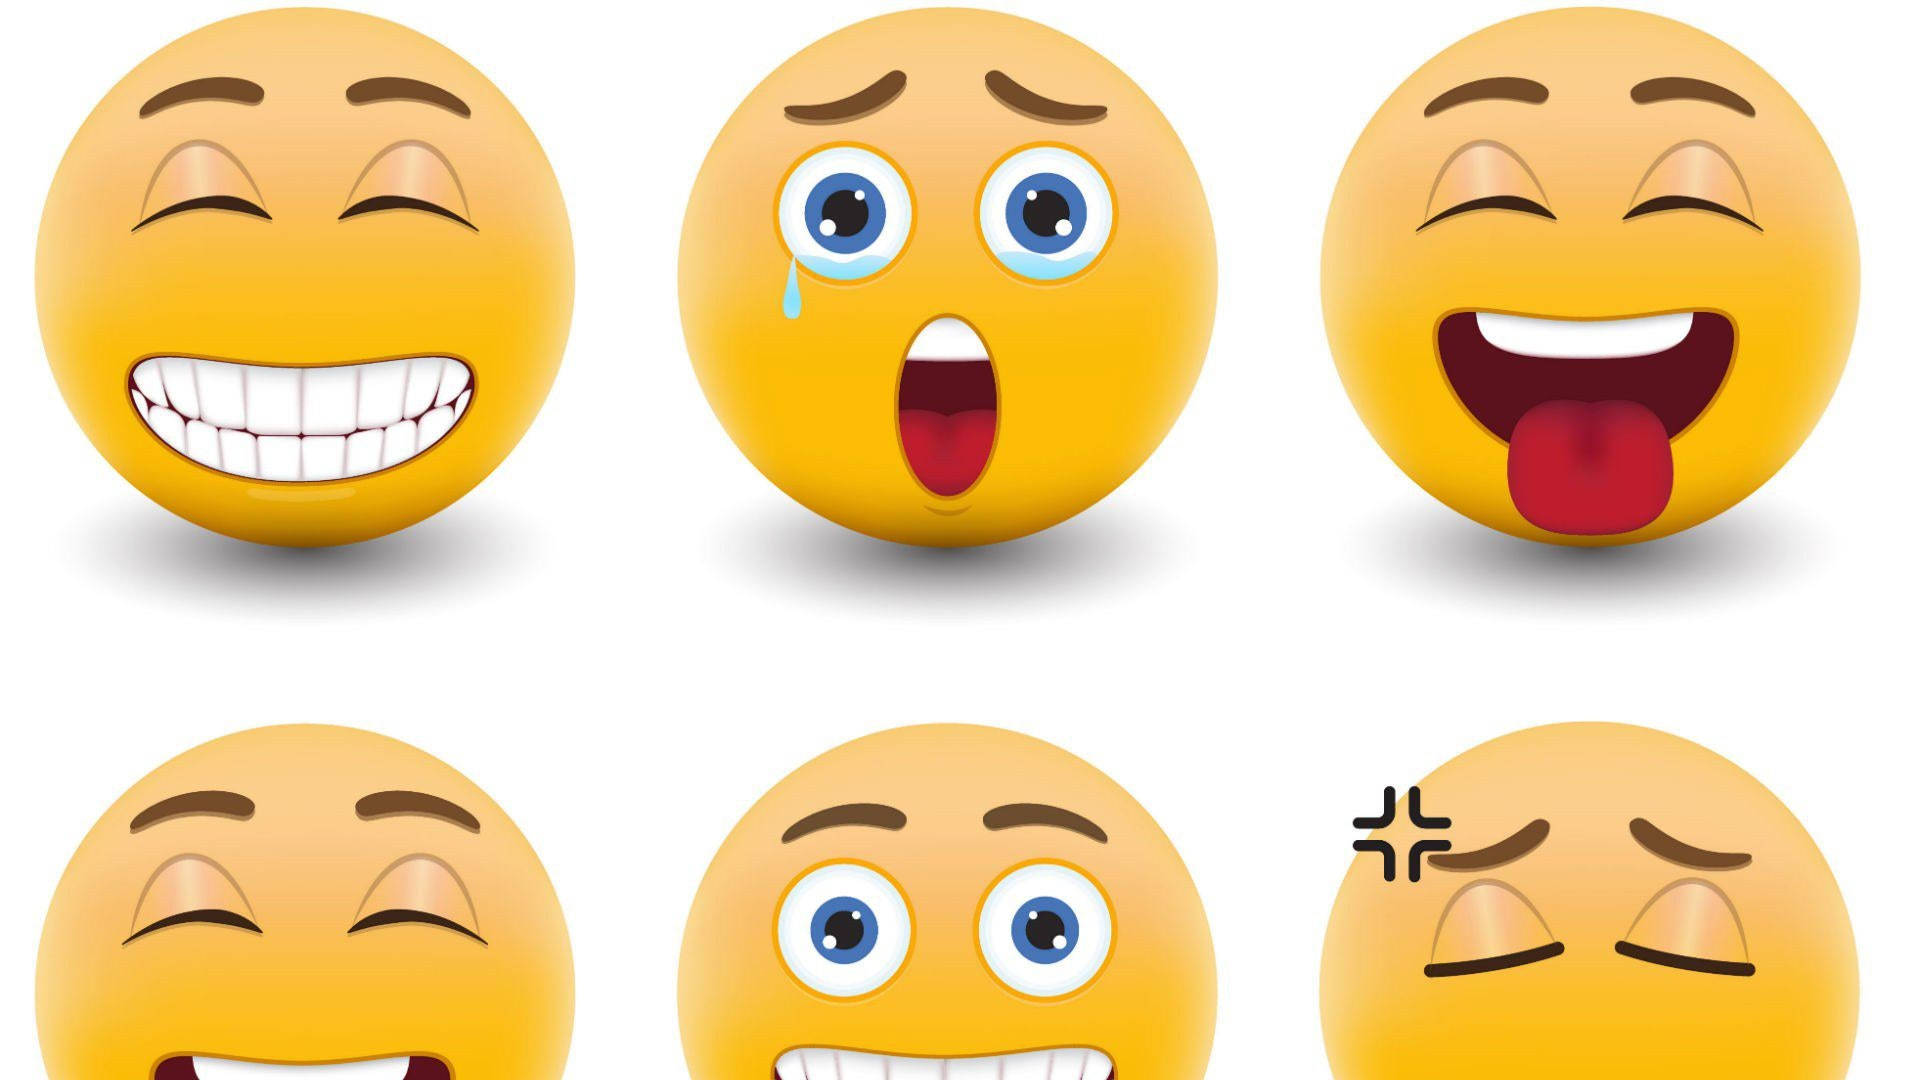 Emoji Faces With Volatile Expressions Wallpaper